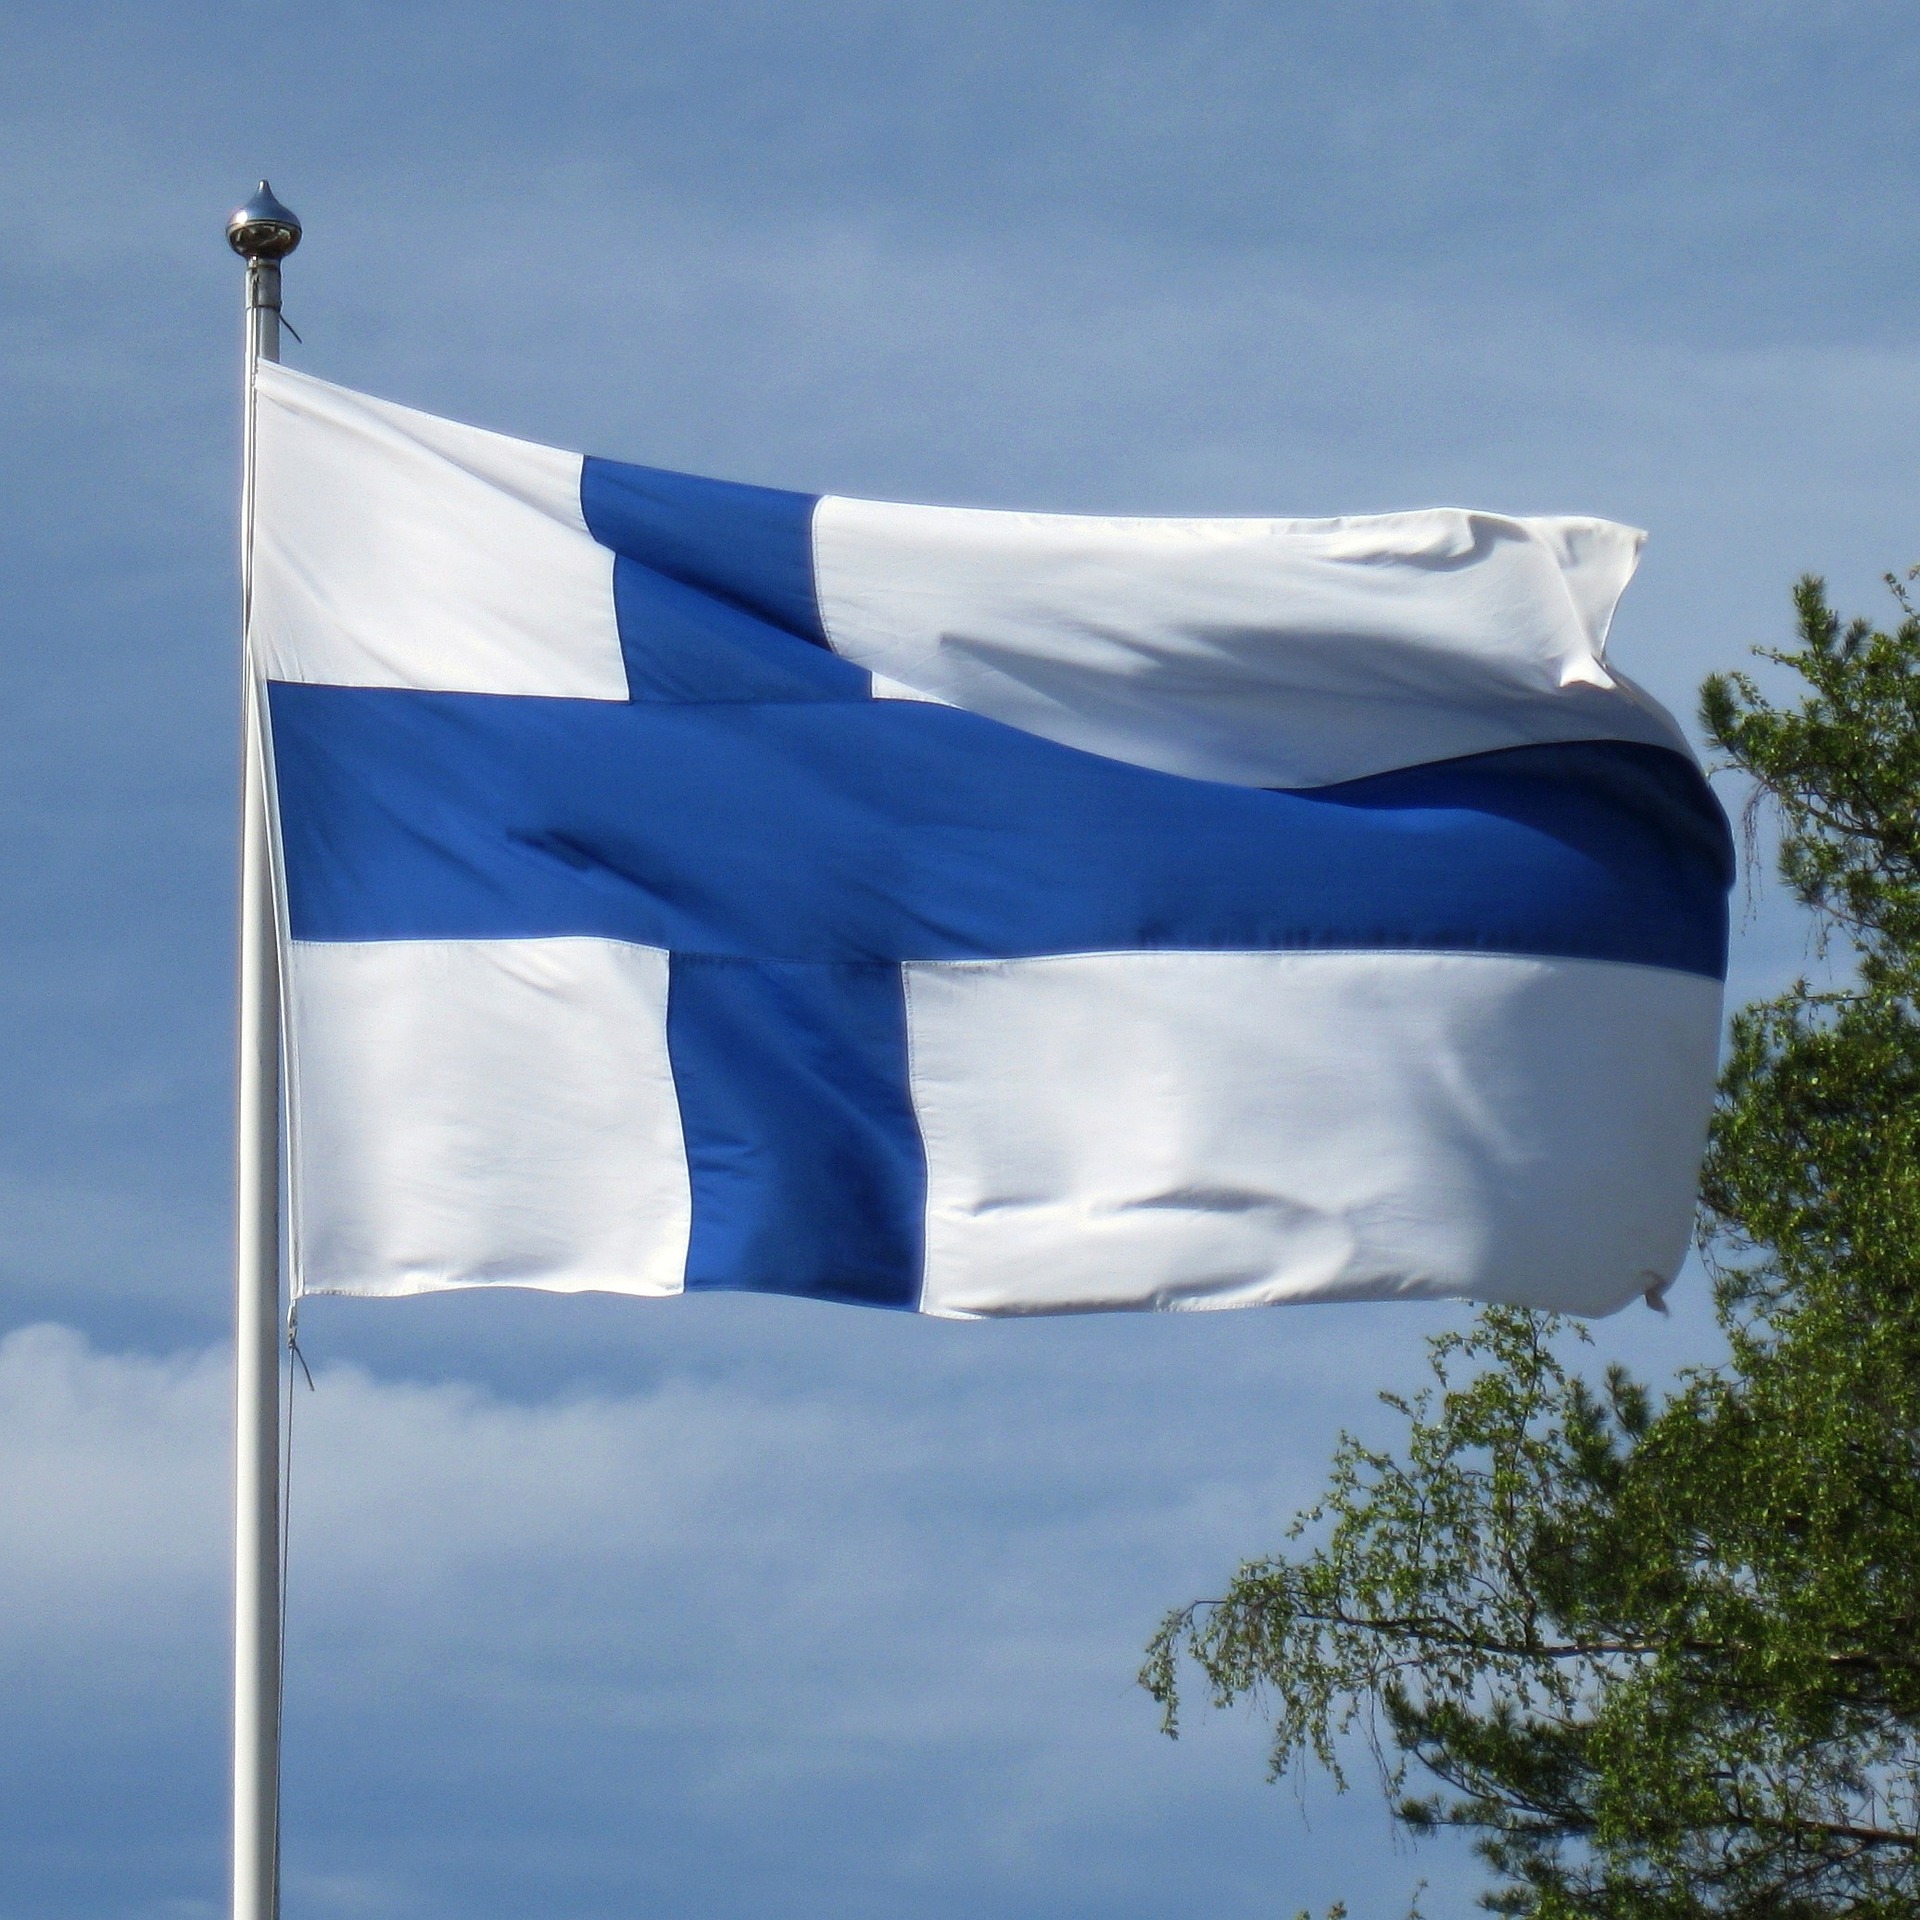 Finland discusses with Scandinavian neighbors over Baltic Sea gas leakages